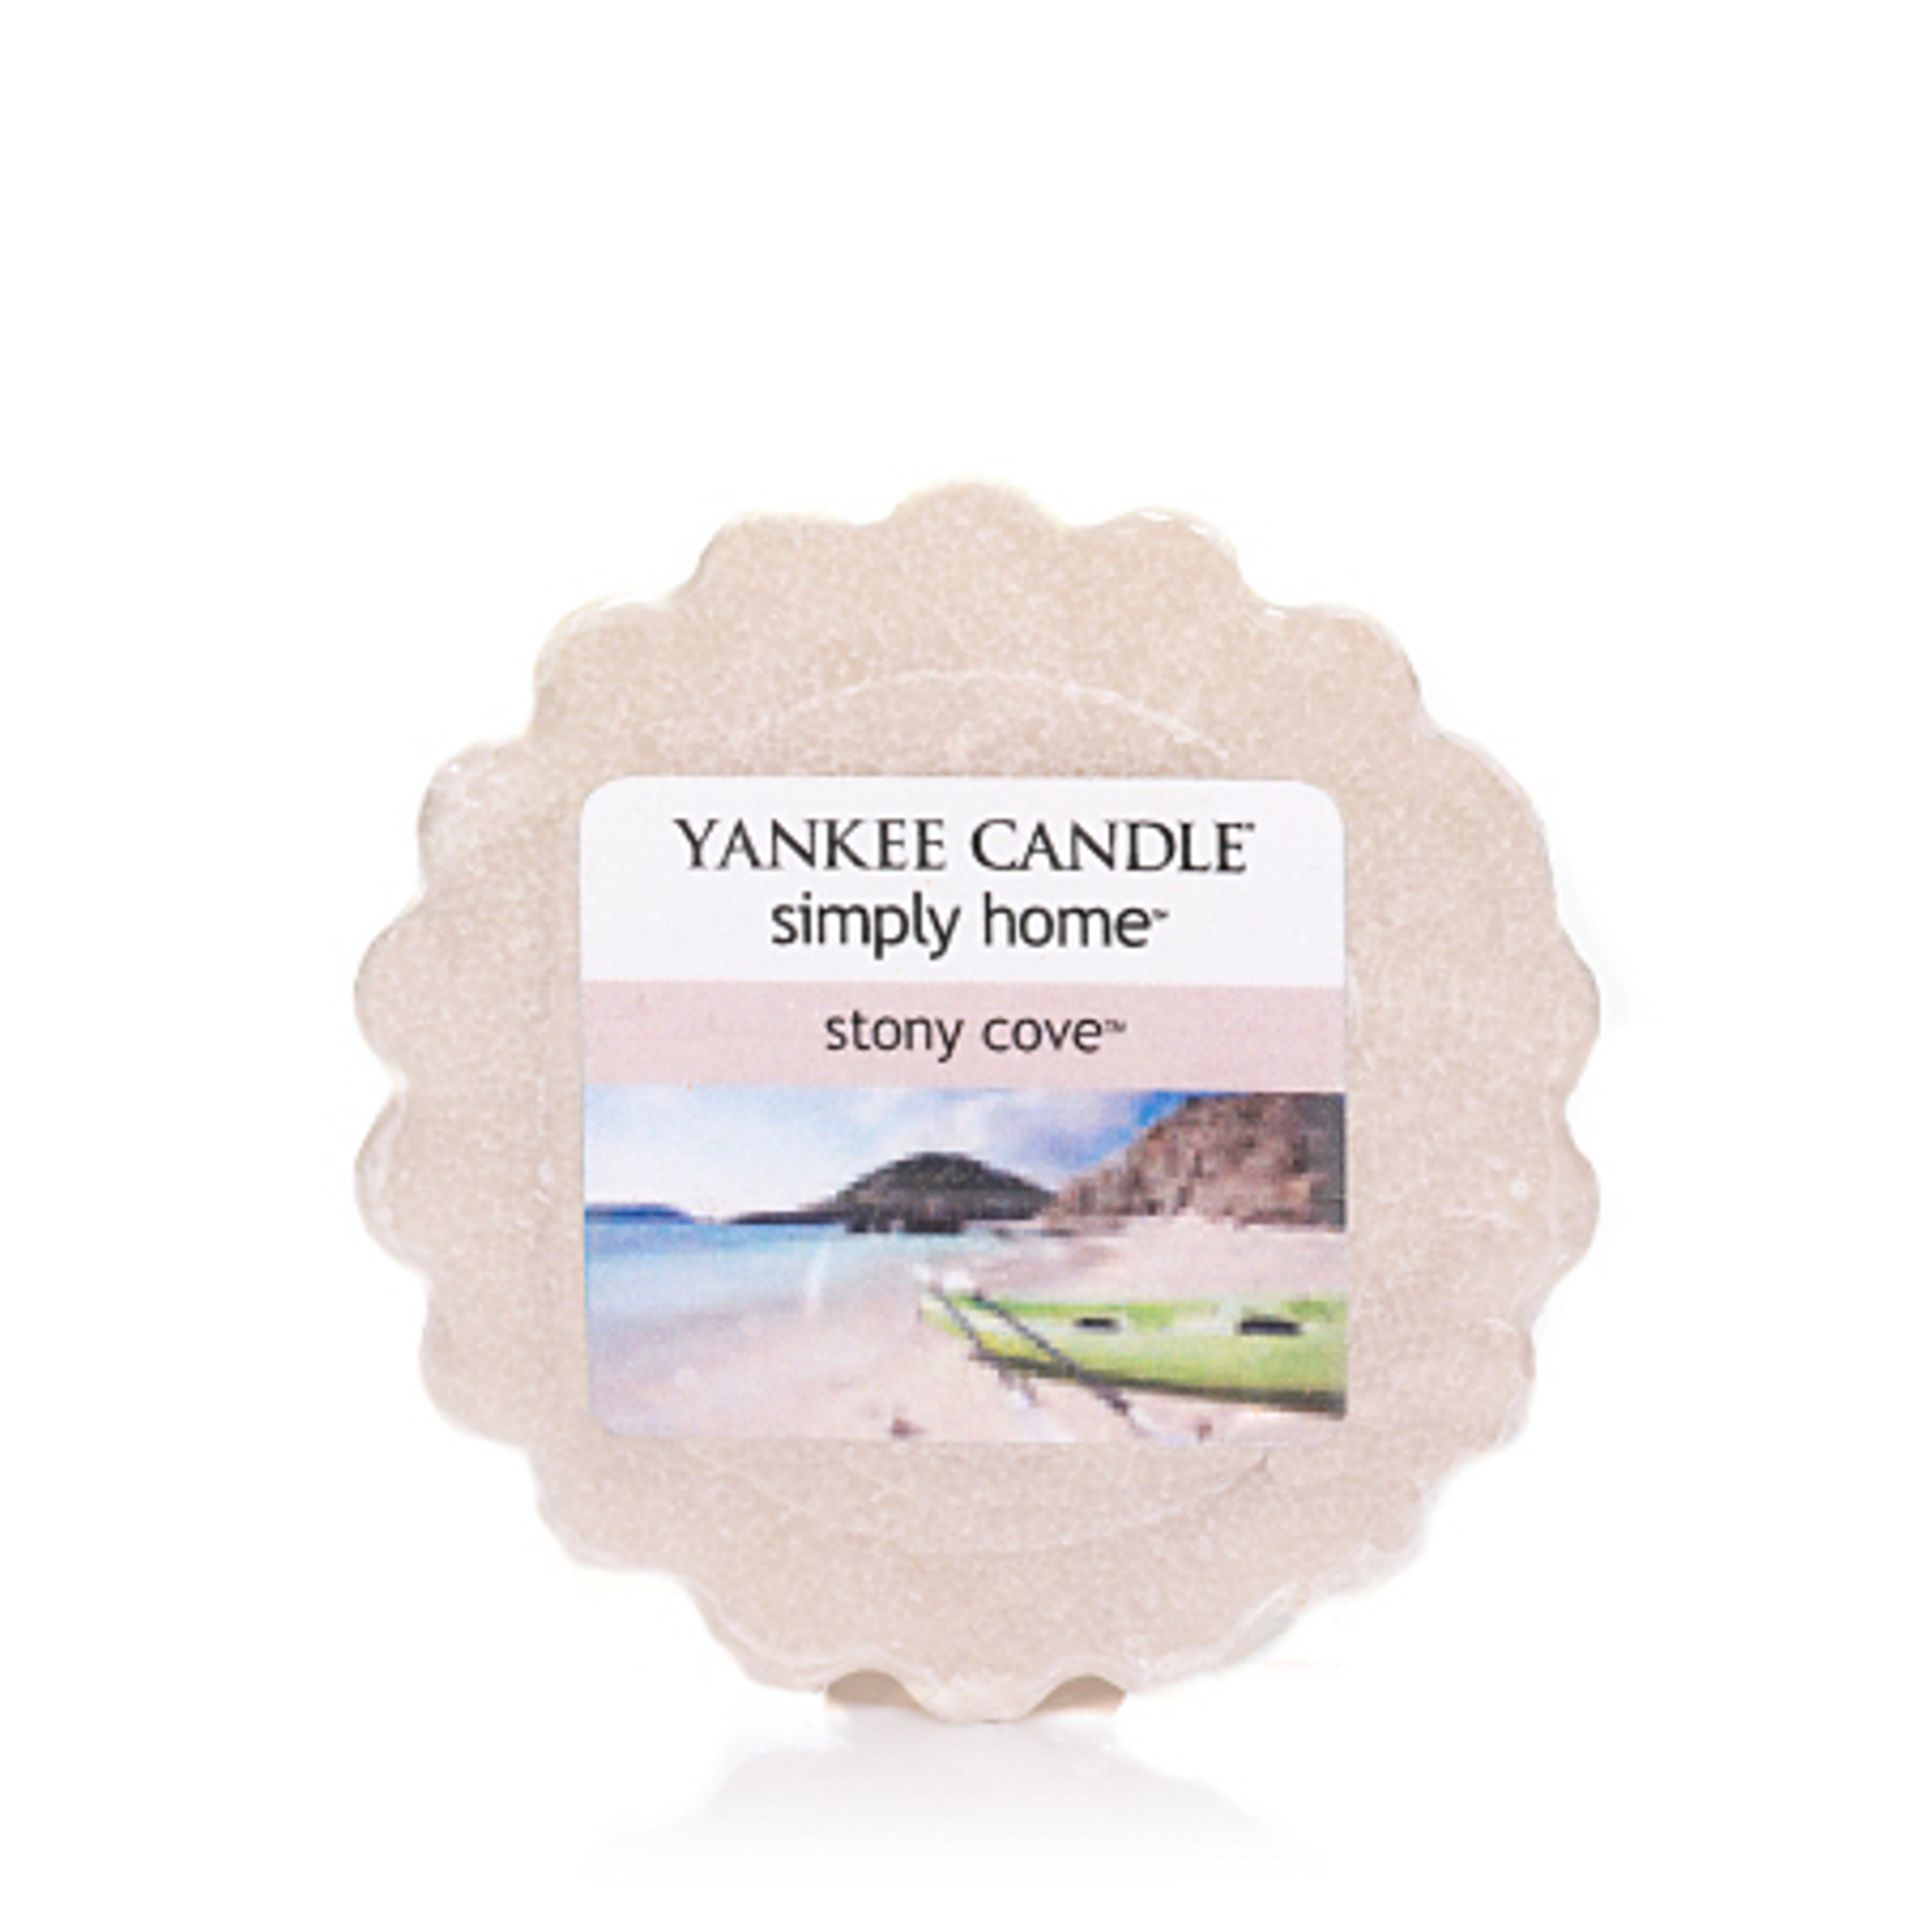 V Brand New 24 x Yankee Candle Tarts Stony Cove RRP: £35.76 (Yankee Candles) X 2 YOUR BID PRICE TO